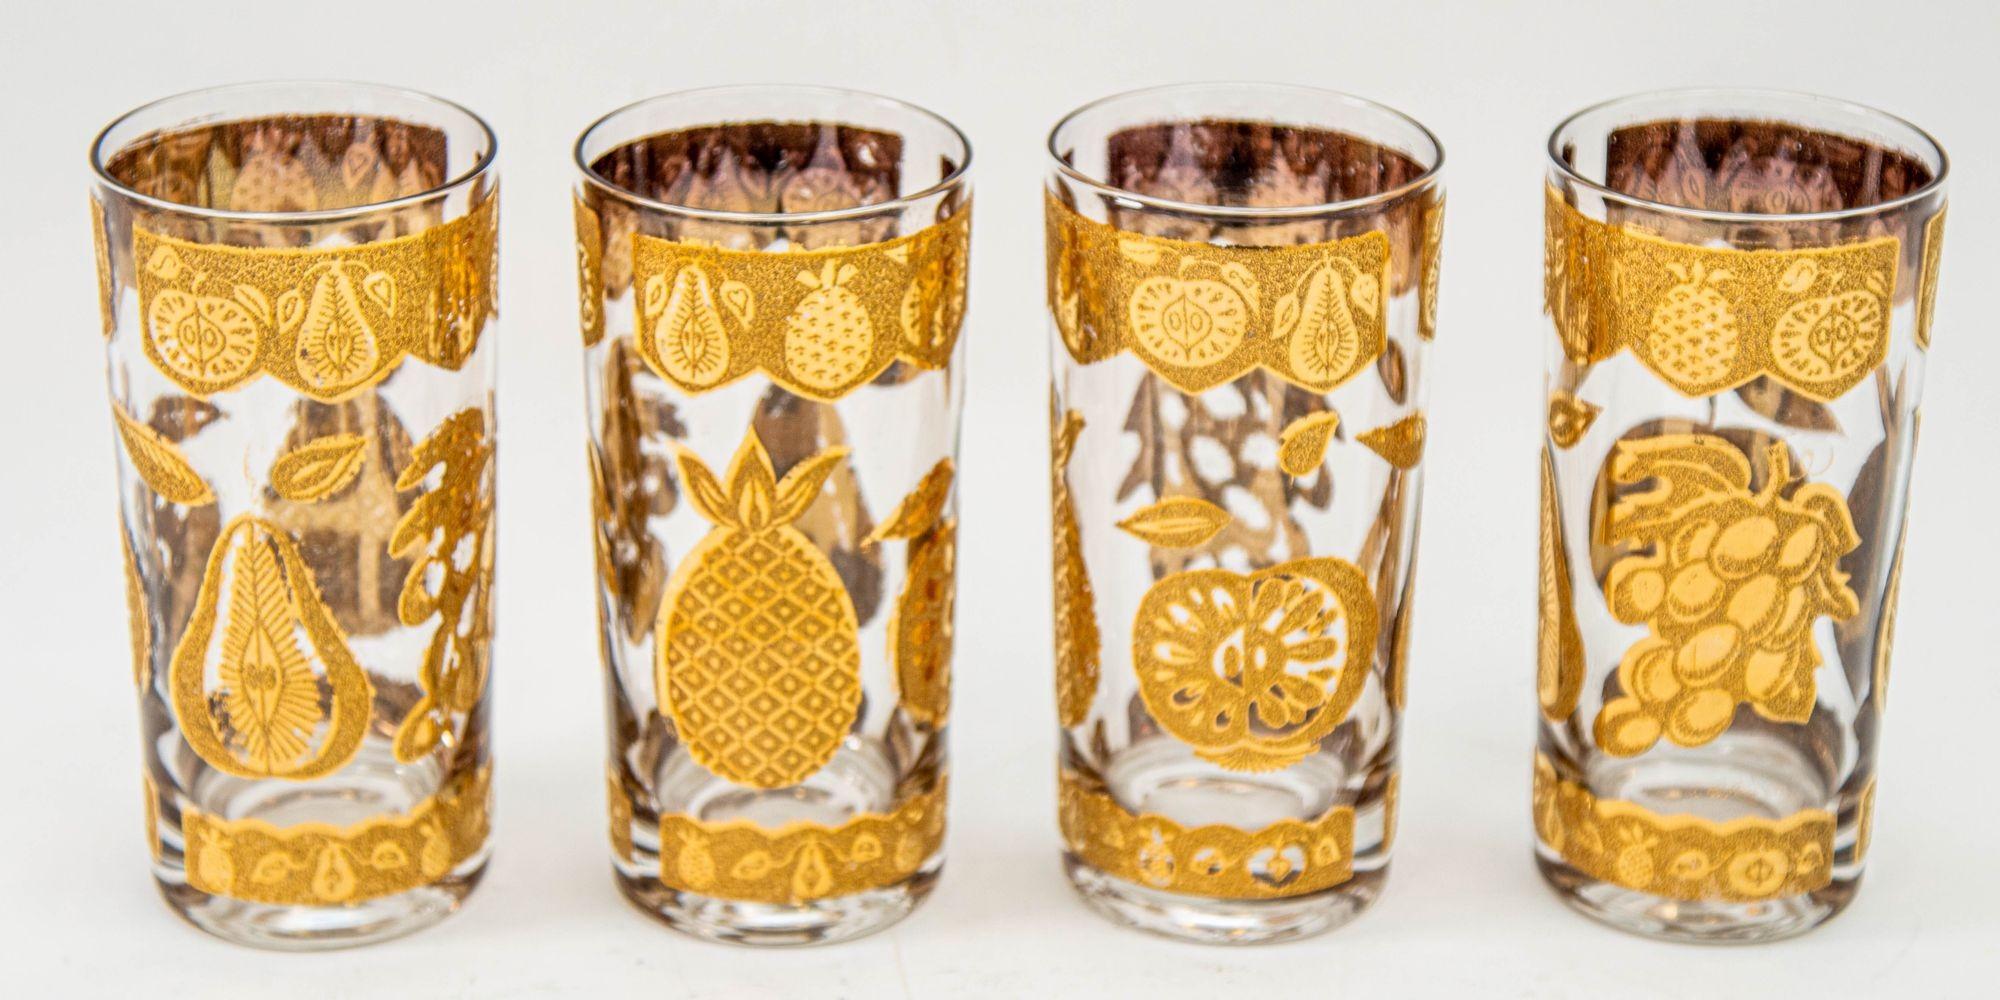 1960s Culver Cocktail Glasses with 22-Karat Gold Florentine Pattern Set of Four.
Elegant vintage midcentury Culver barware glasses with a gold leaf finish.
Vintage Culver Florentine pattern cocktail glasses decorated in smooth and textured 22k gold